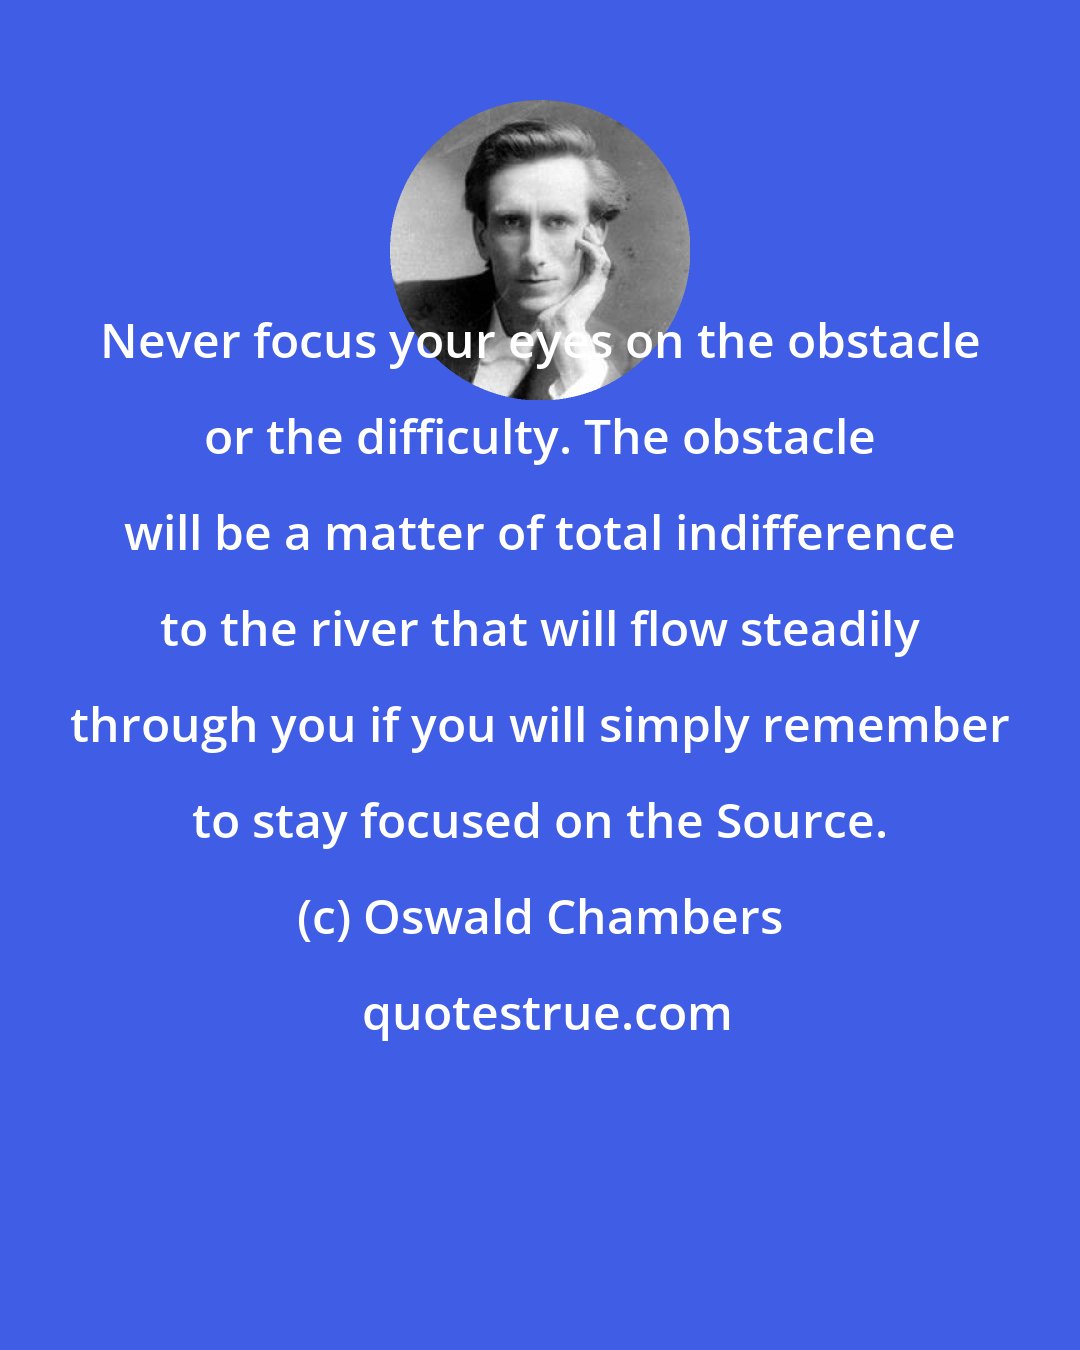 Oswald Chambers: Never focus your eyes on the obstacle or the difficulty. The obstacle will be a matter of total indifference to the river that will flow steadily through you if you will simply remember to stay focused on the Source.